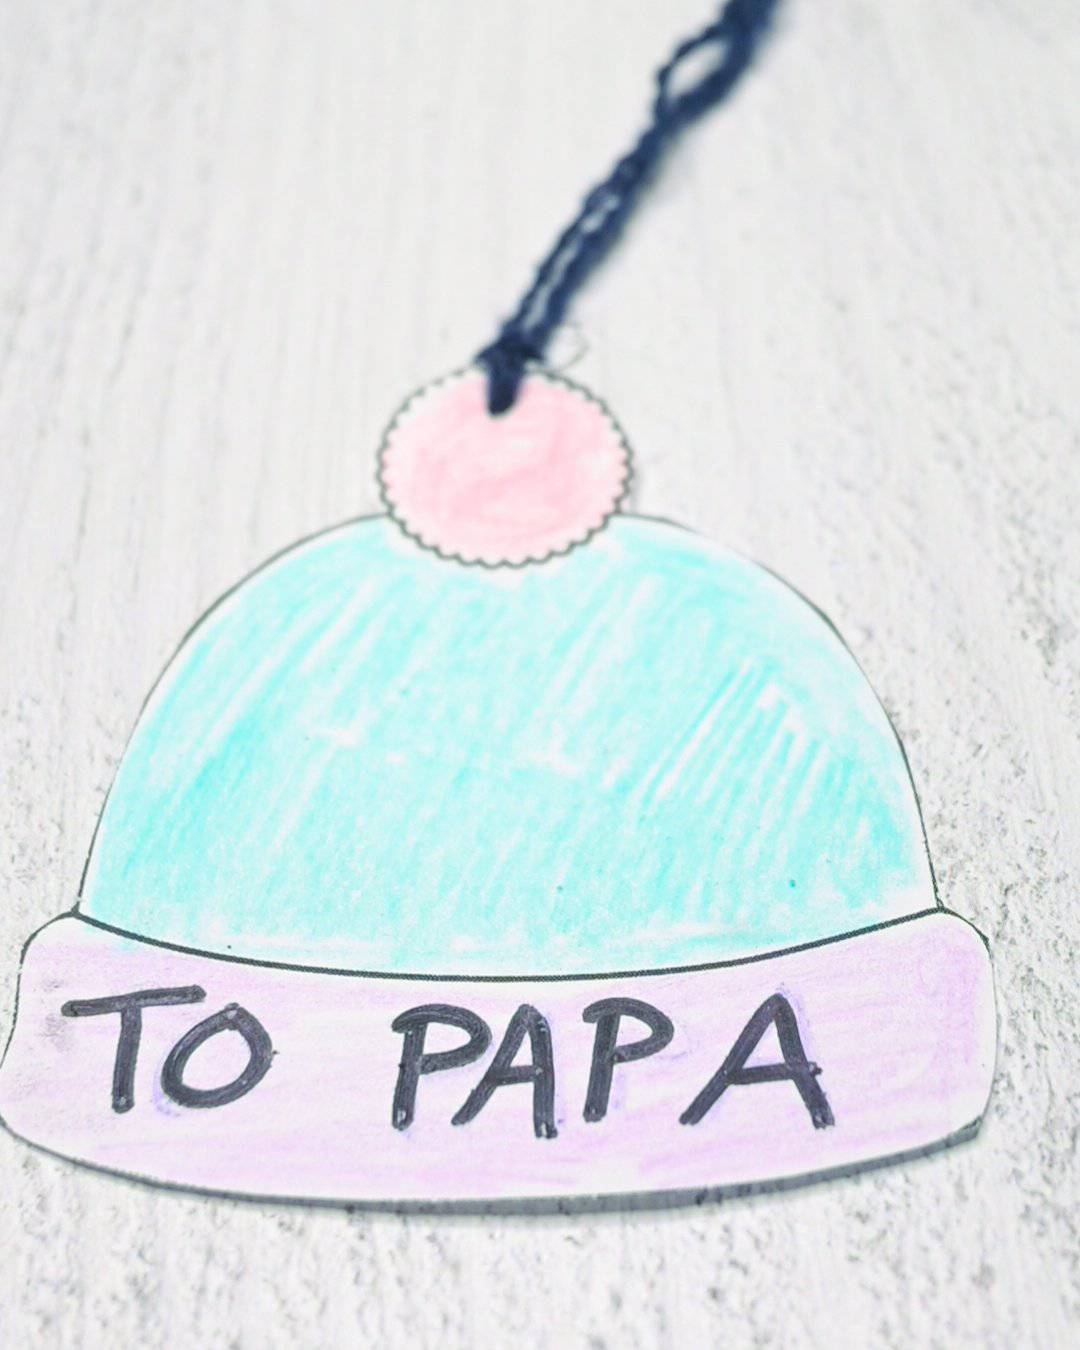 A gift tag in the shape of a hat with the text "to Papa" written on it